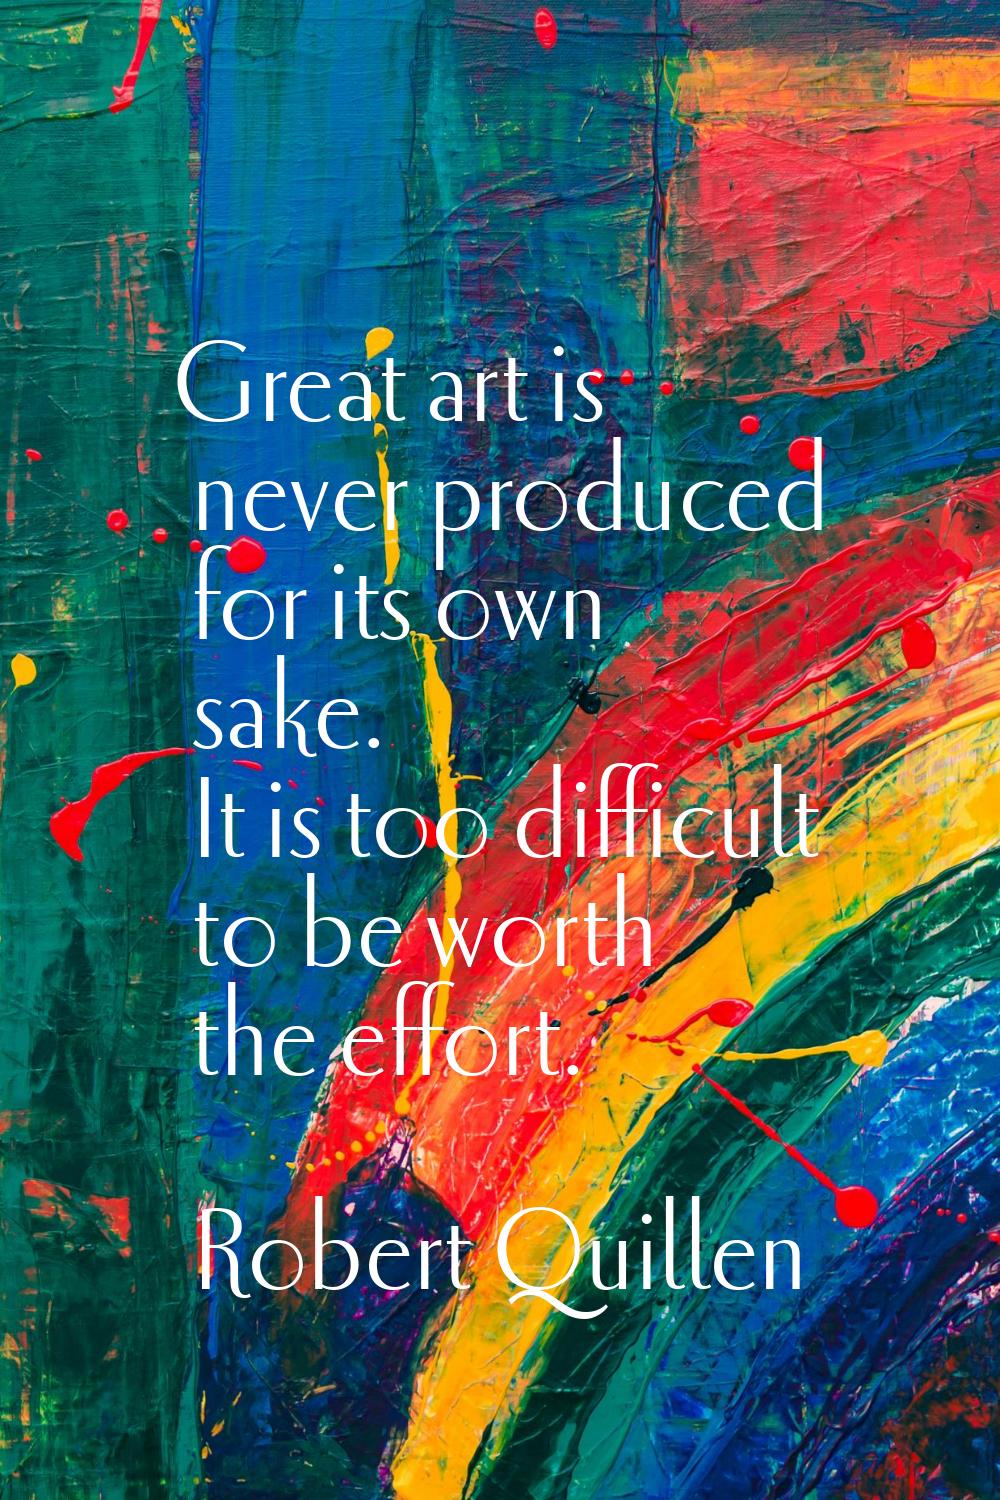 Great art is never produced for its own sake. It is too difficult to be worth the effort.